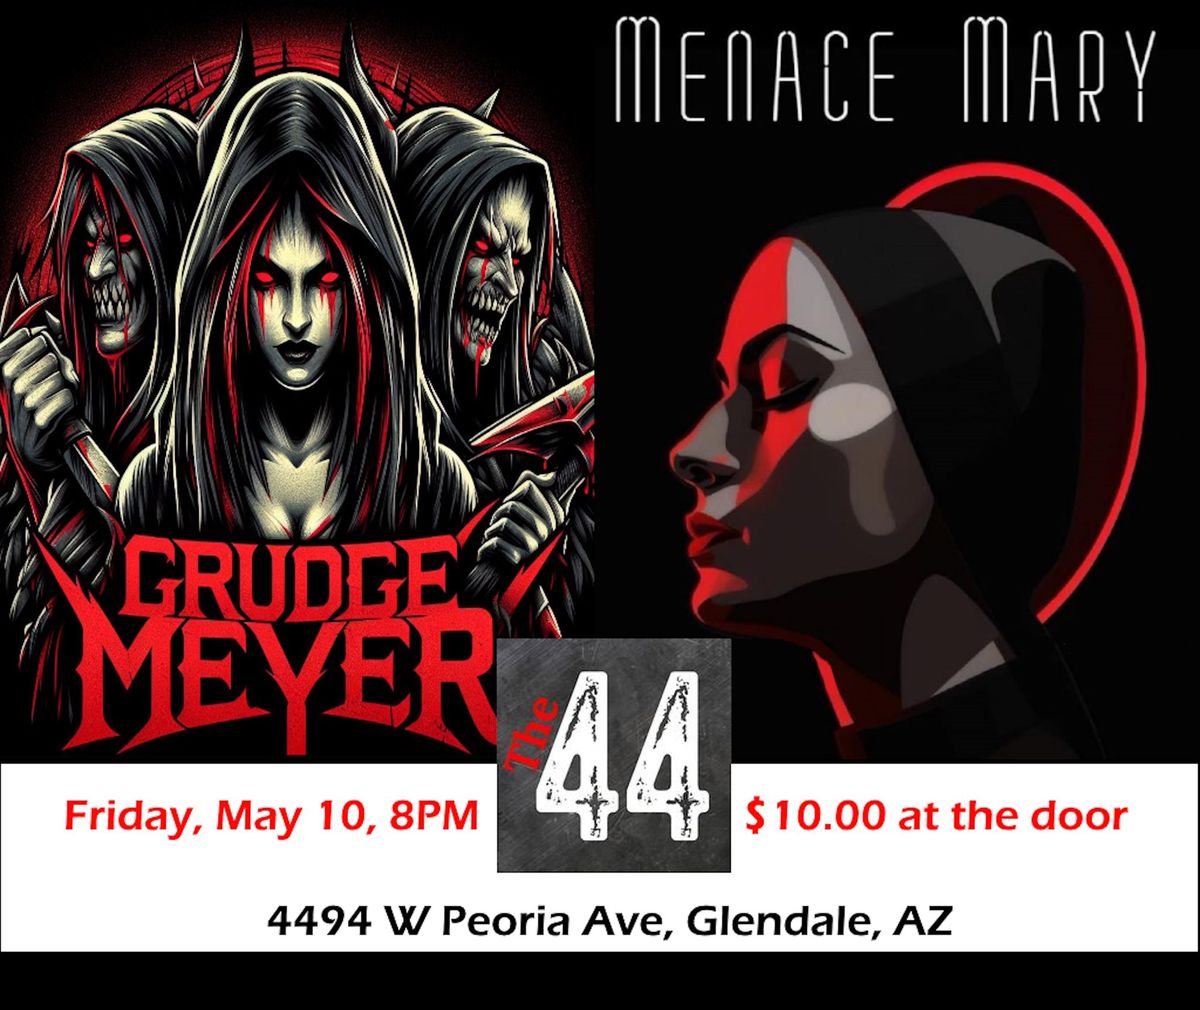 Grudge Meyer & Menace Mary @ The 44